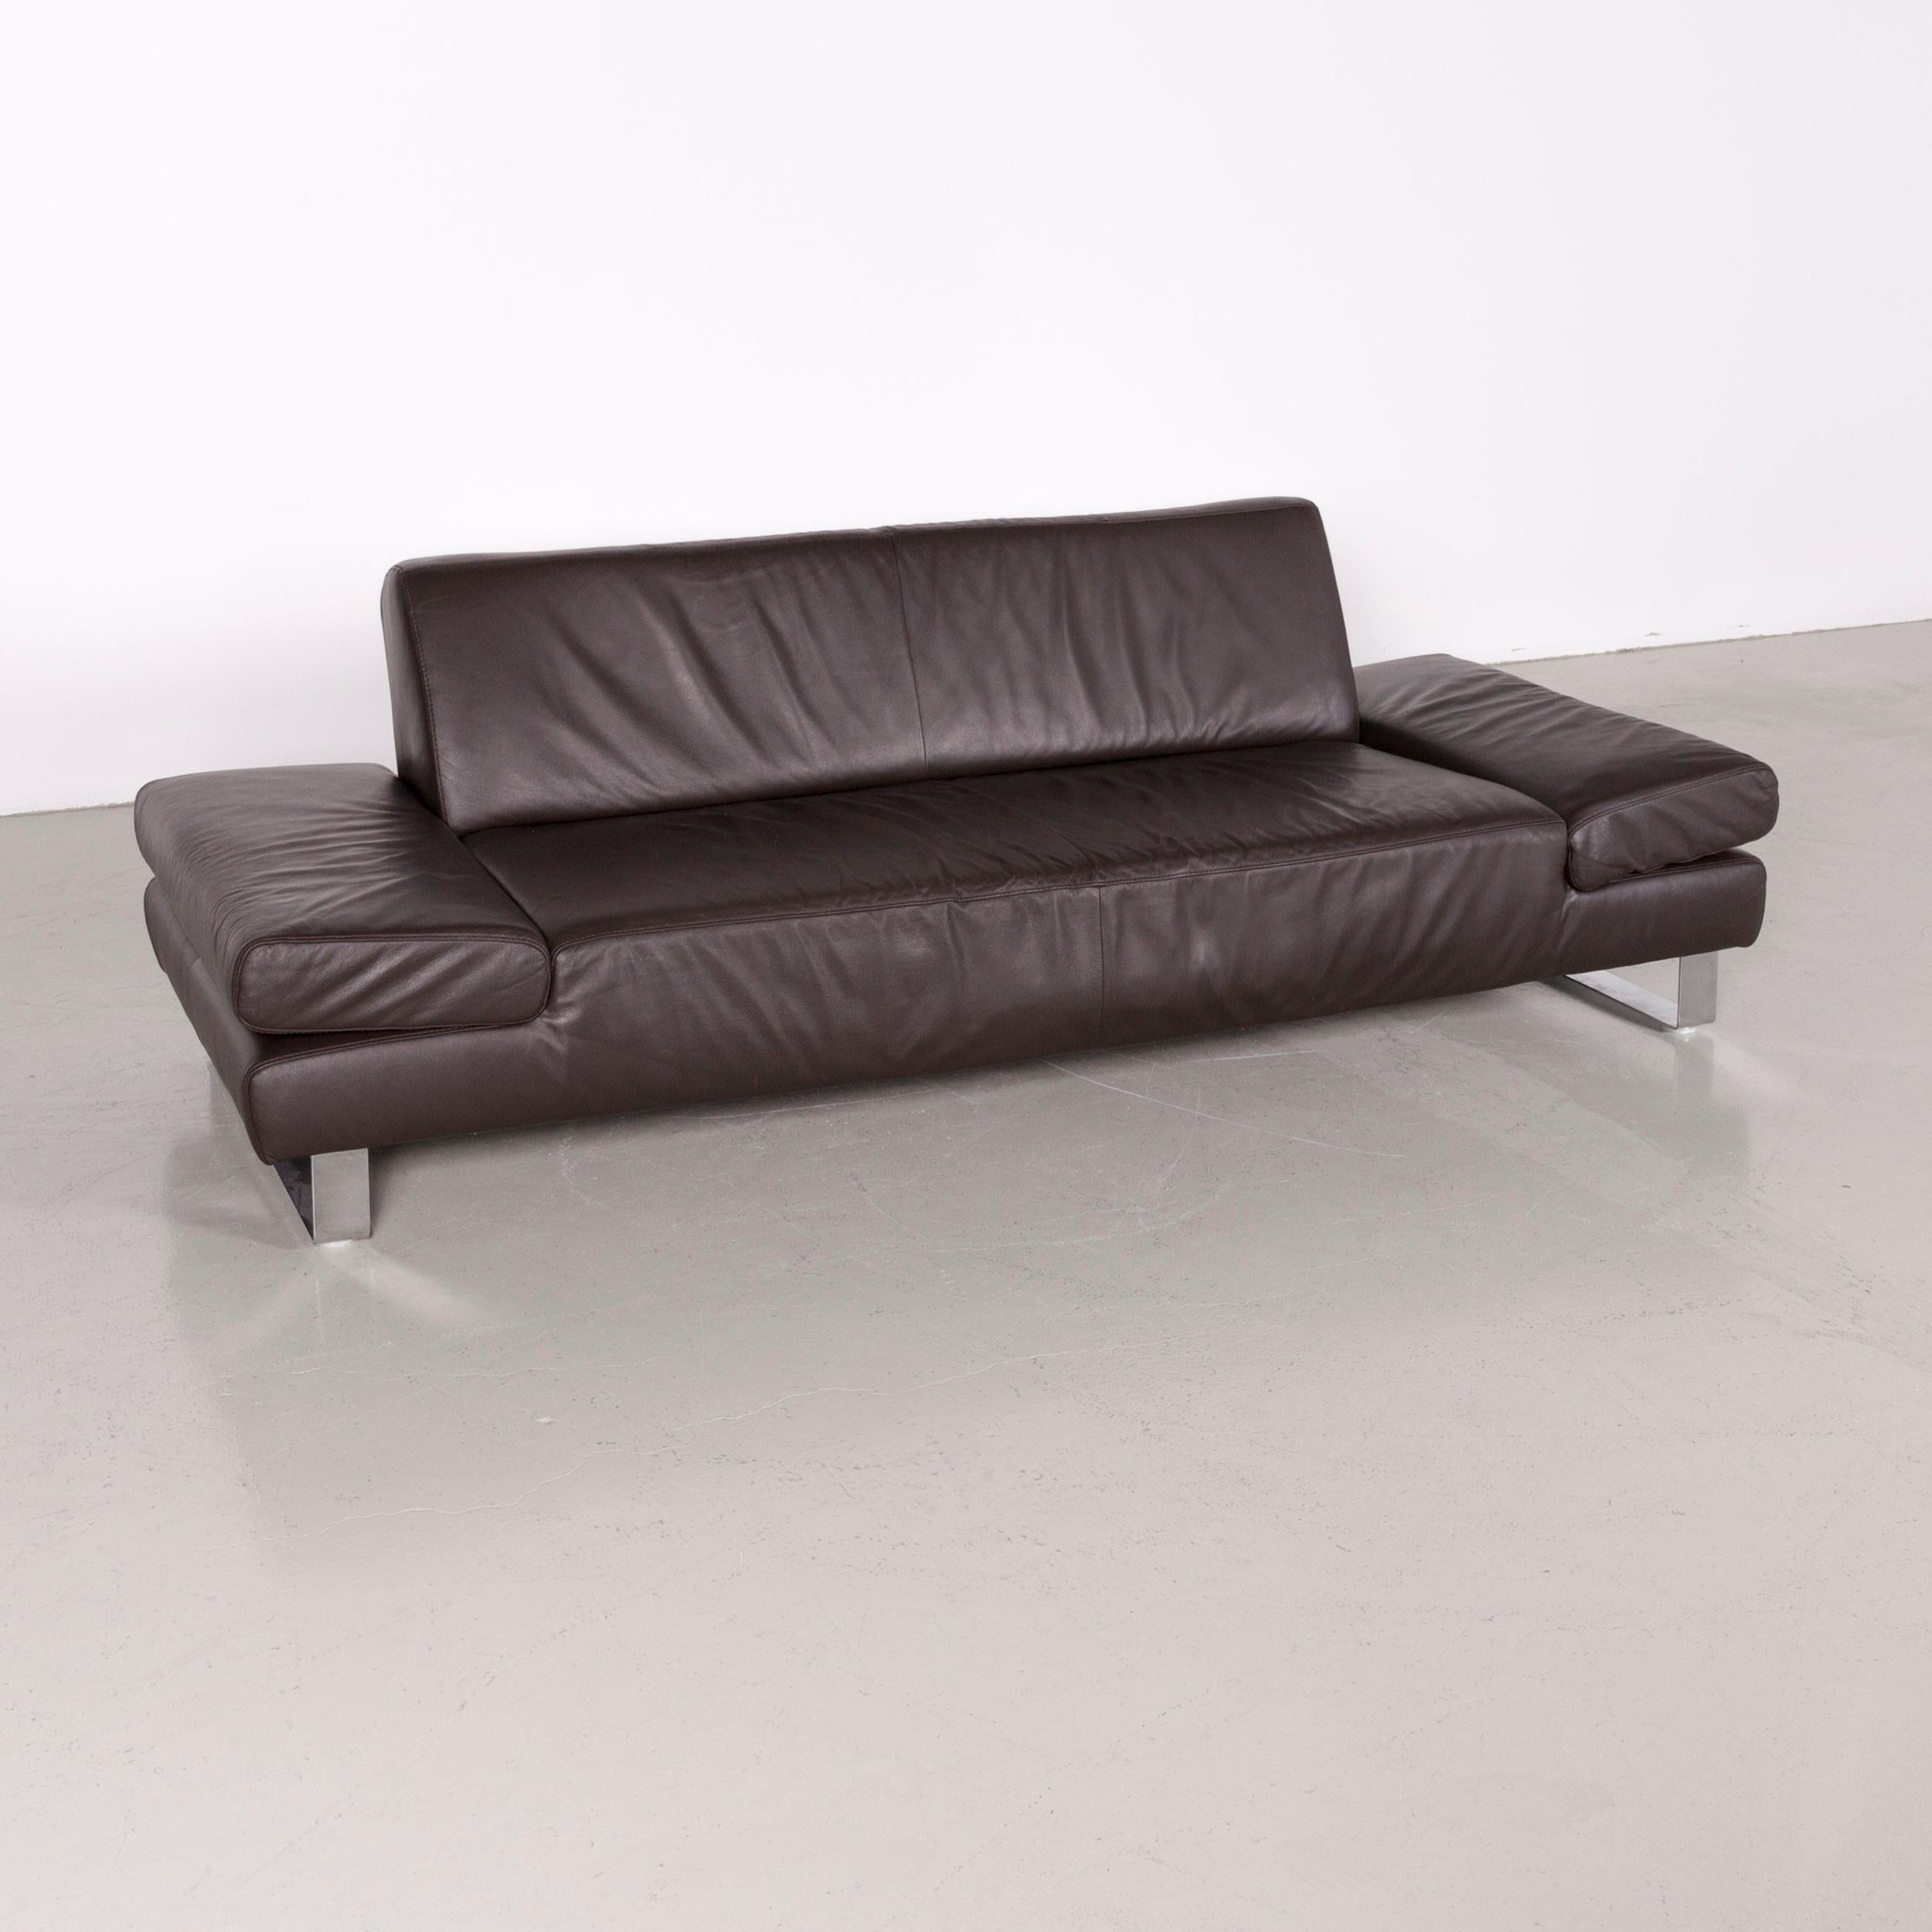 We bring to you an Willi Schillig Taboo designer leather sofa brown three-seat couch.

































 